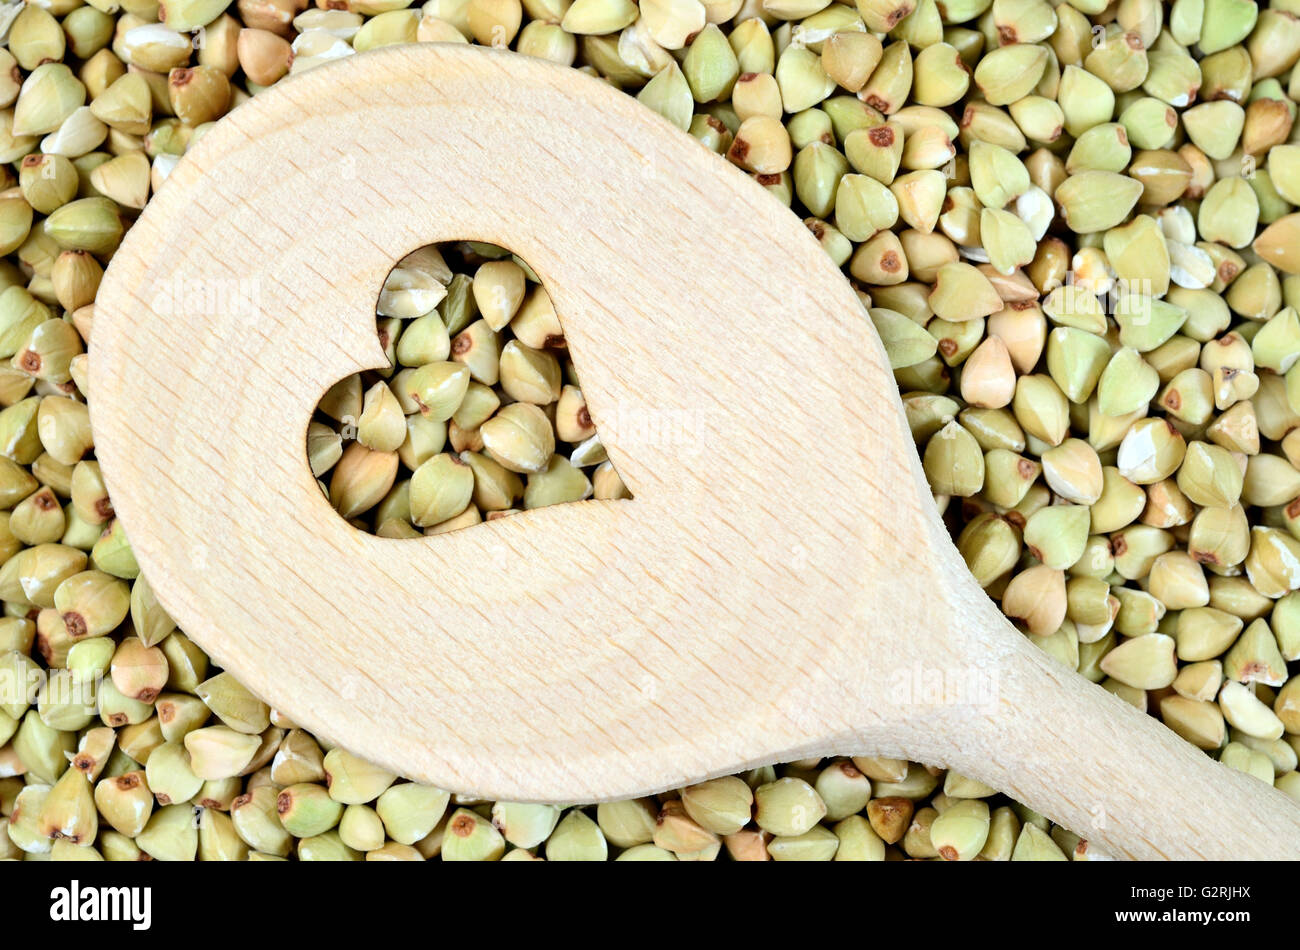 Wooden spoon with heart shape in a green buckwheat background Stock Photo